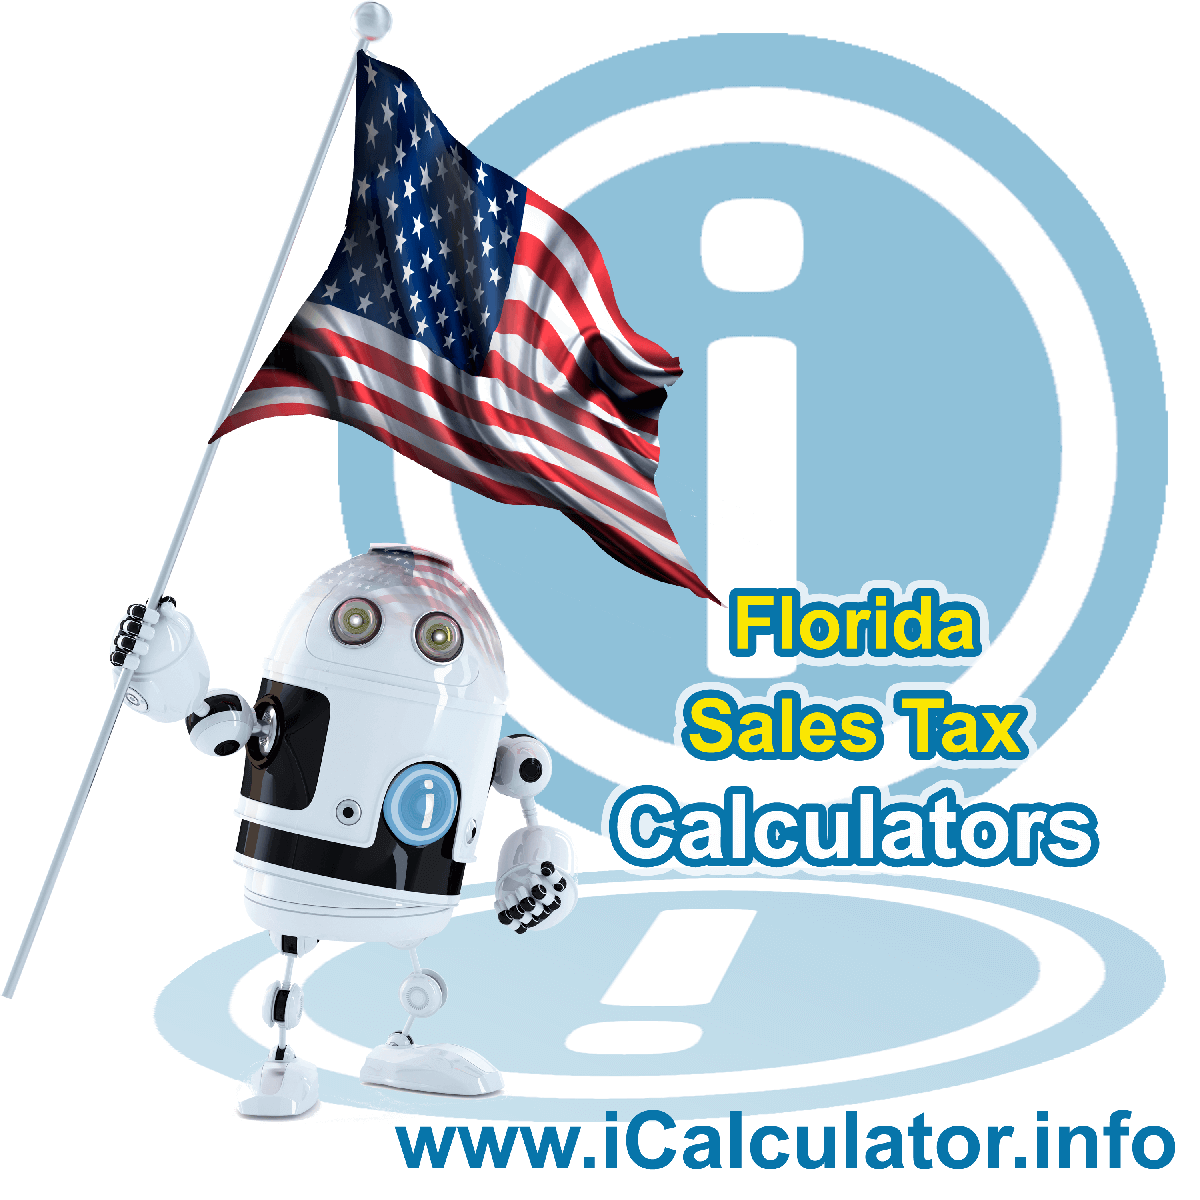 Niceville Sales Rates: This image illustrates a calculator robot calculating Niceville sales tax manually using the Niceville Sales Tax Formula. You can use this information to calculate Niceville Sales Tax manually or use the Niceville Sales Tax Calculator to calculate sales tax online.